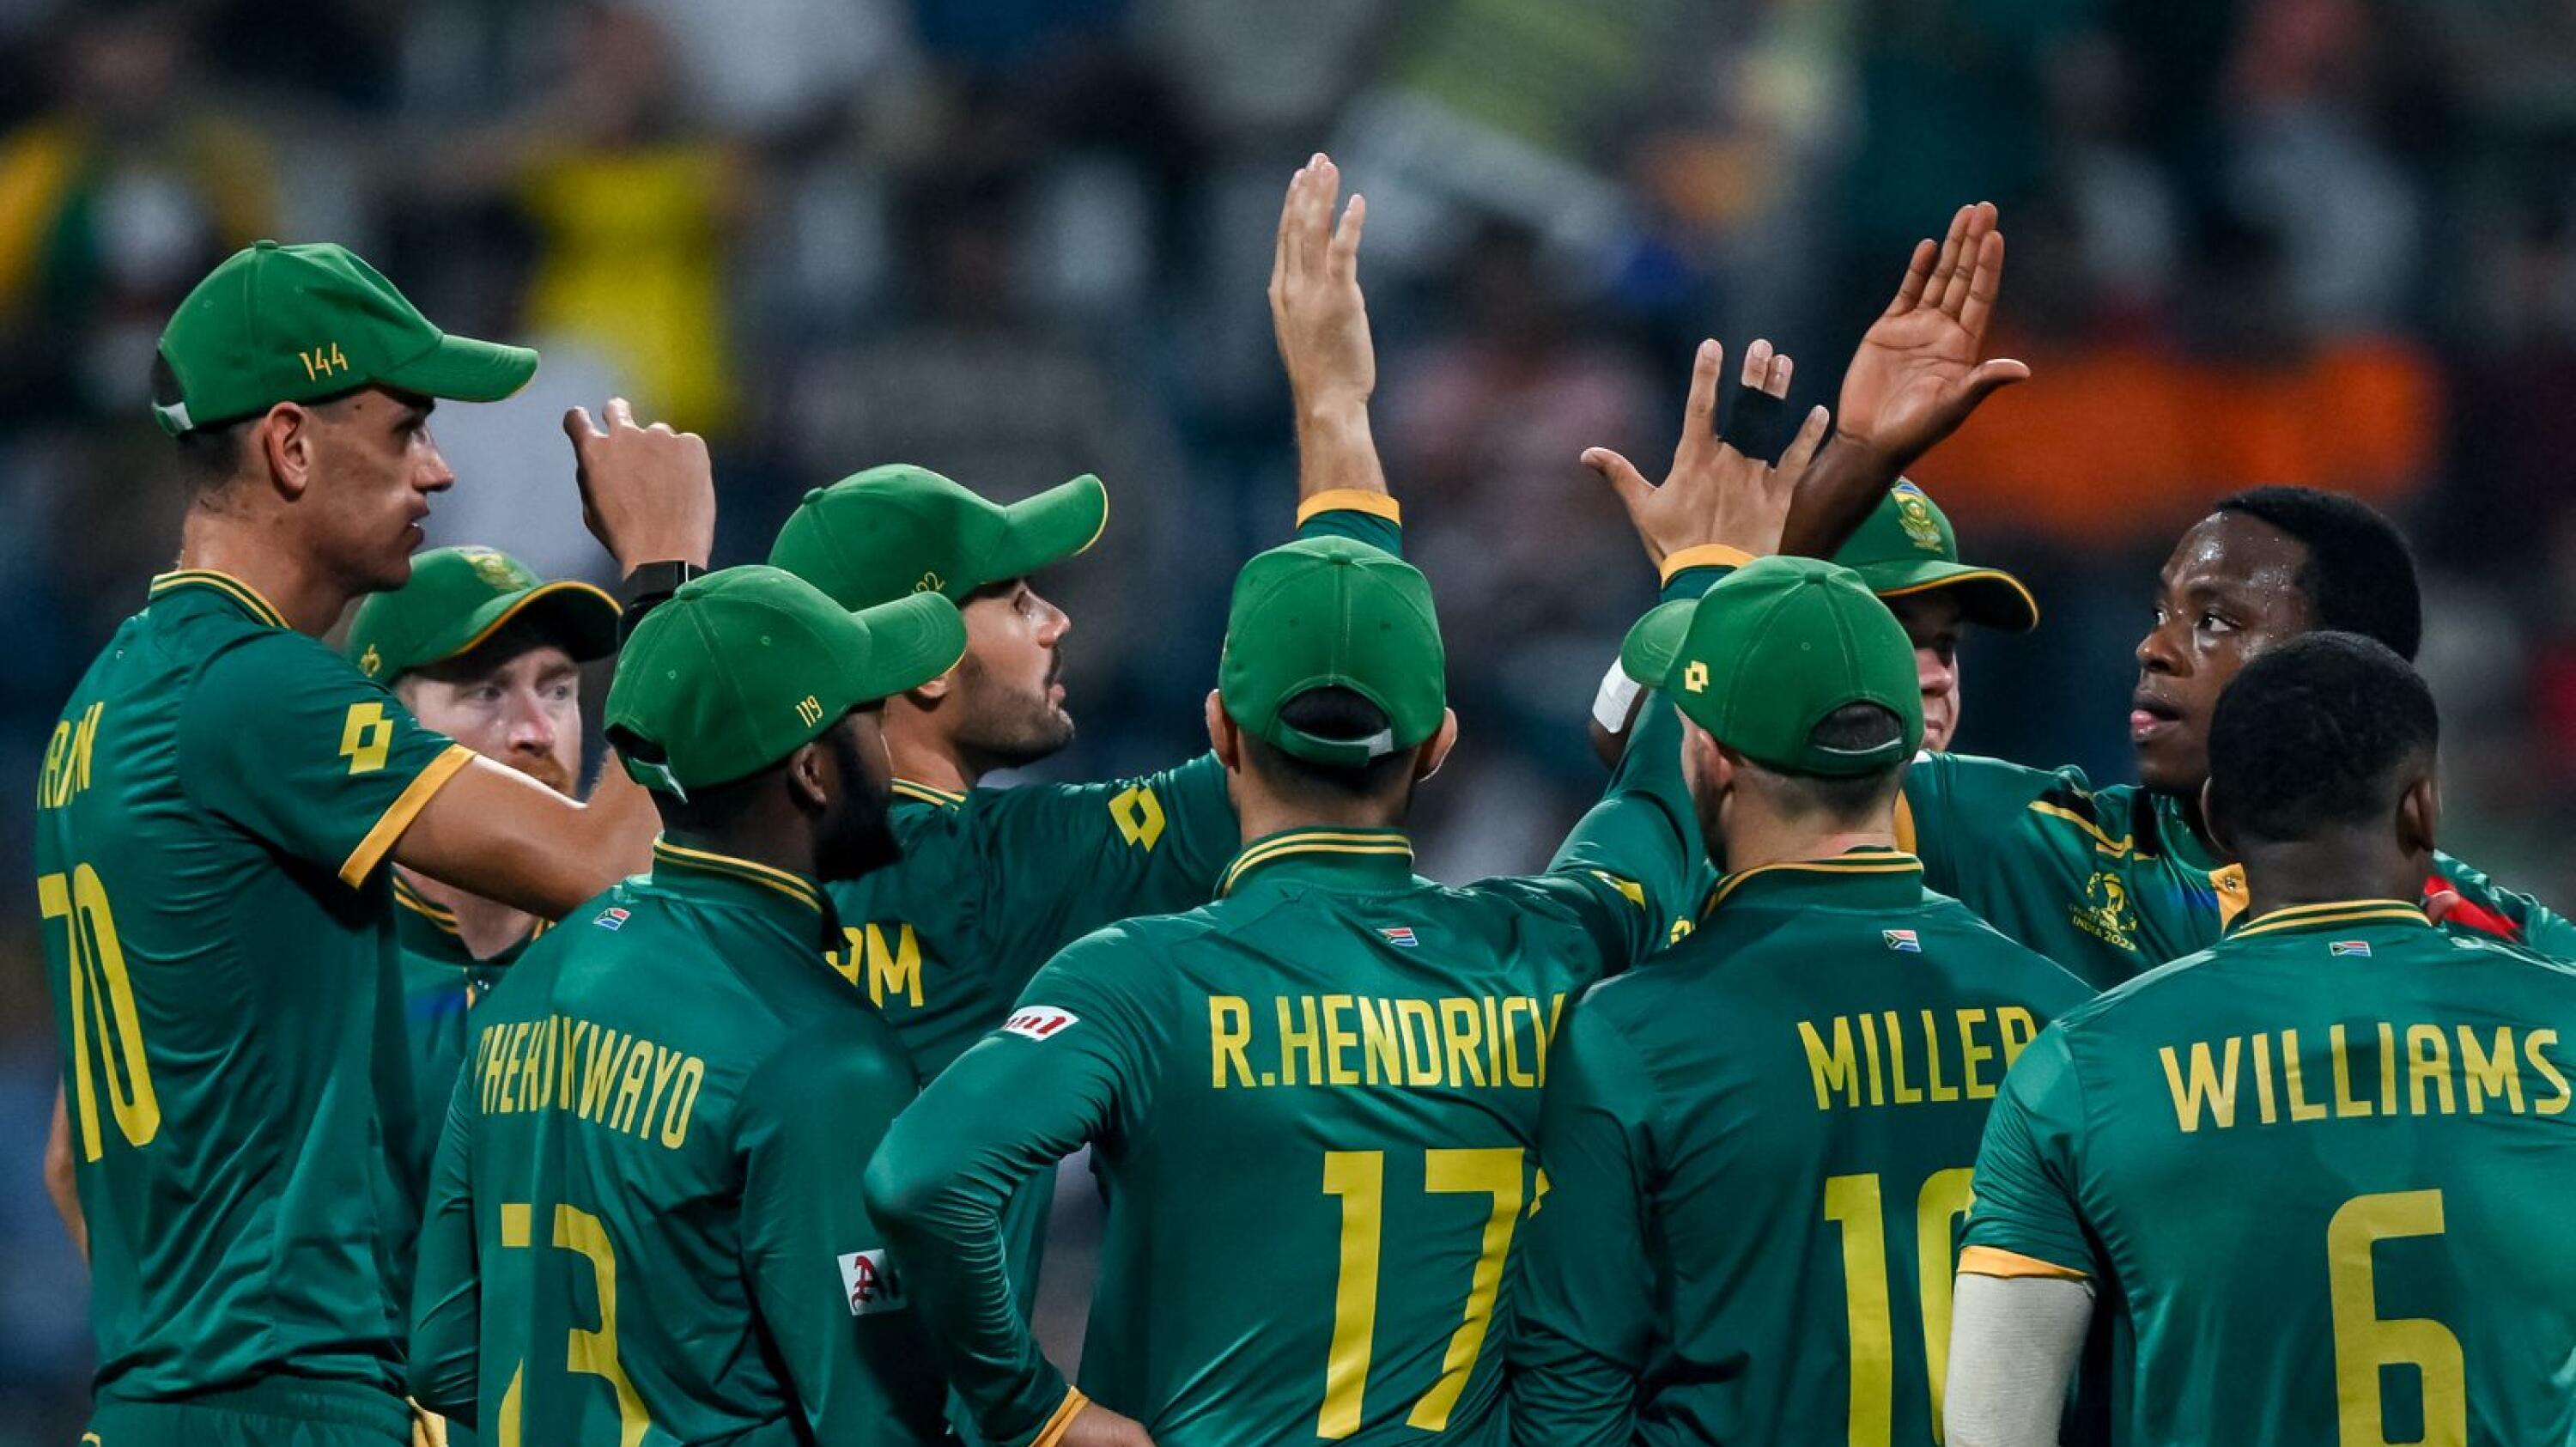 South Africa's Kagiso Rabada celebrates with teammates after taking the wicket of Bangladesh's Liton Das during their Cricket World Cup match